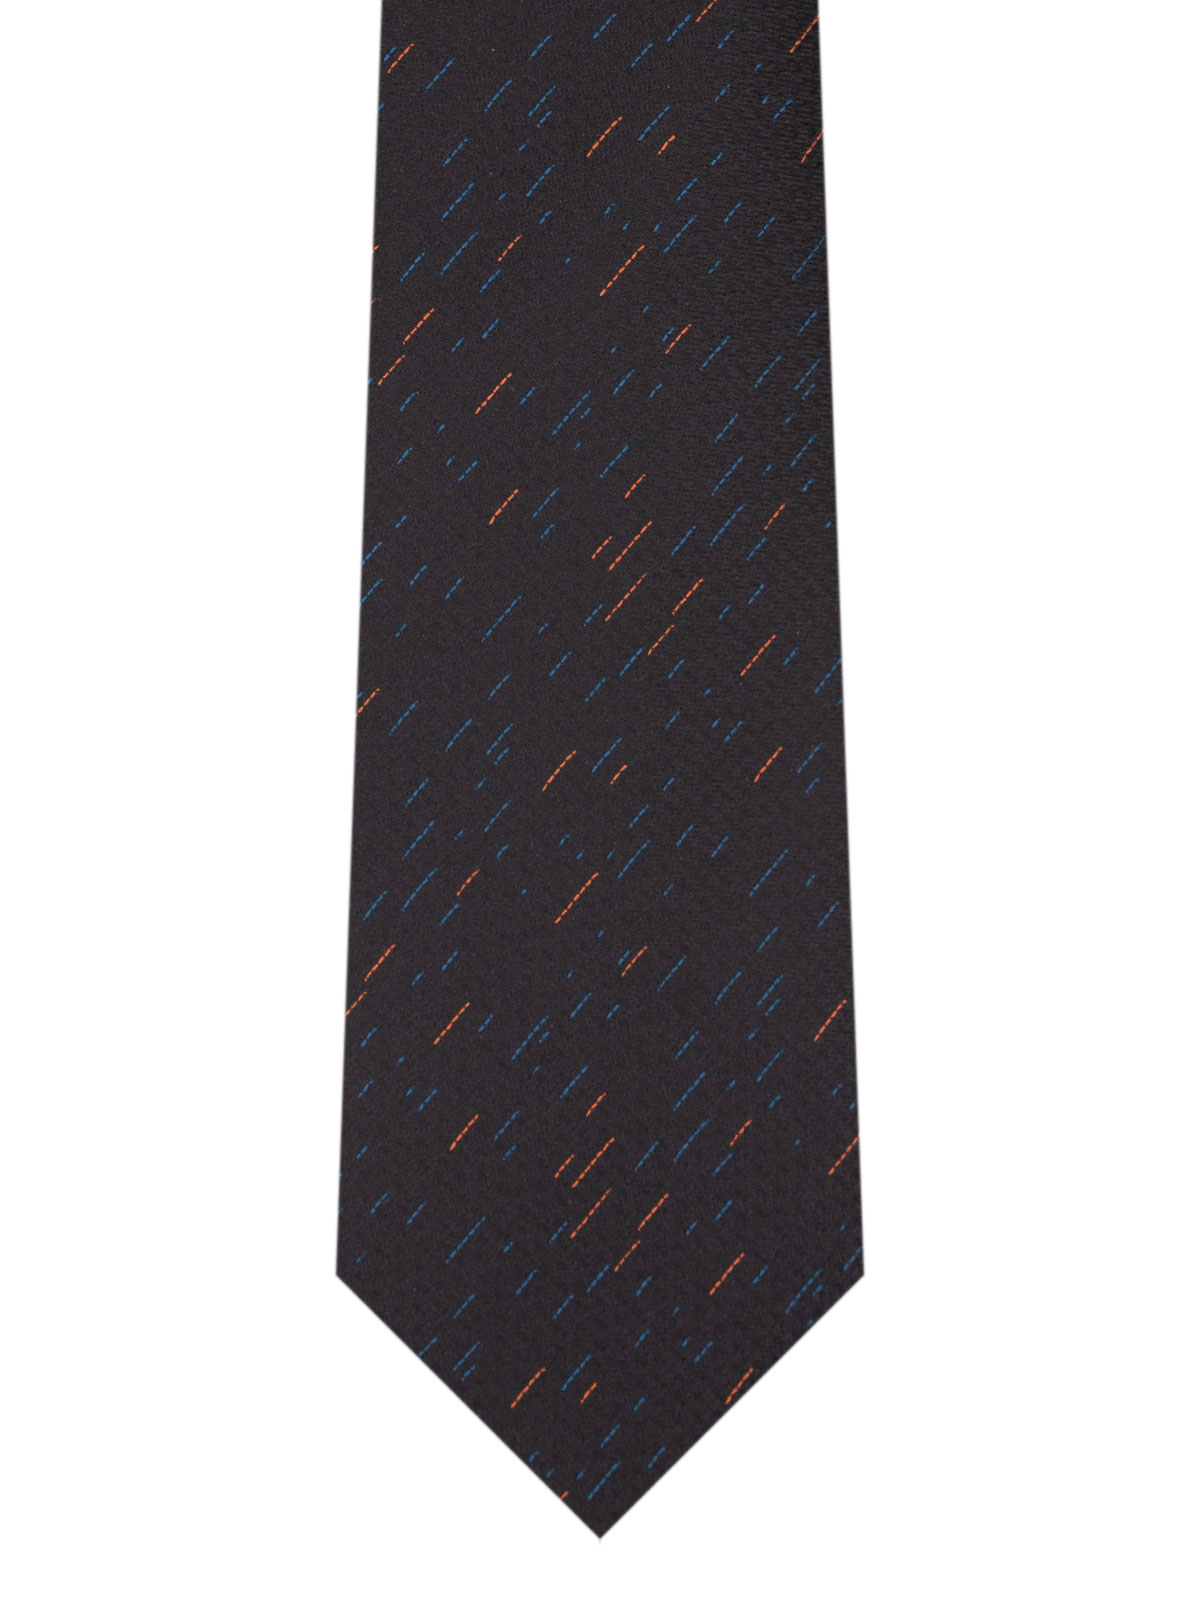 Structured tie with colored threads - 10172 - € 14.06 img2